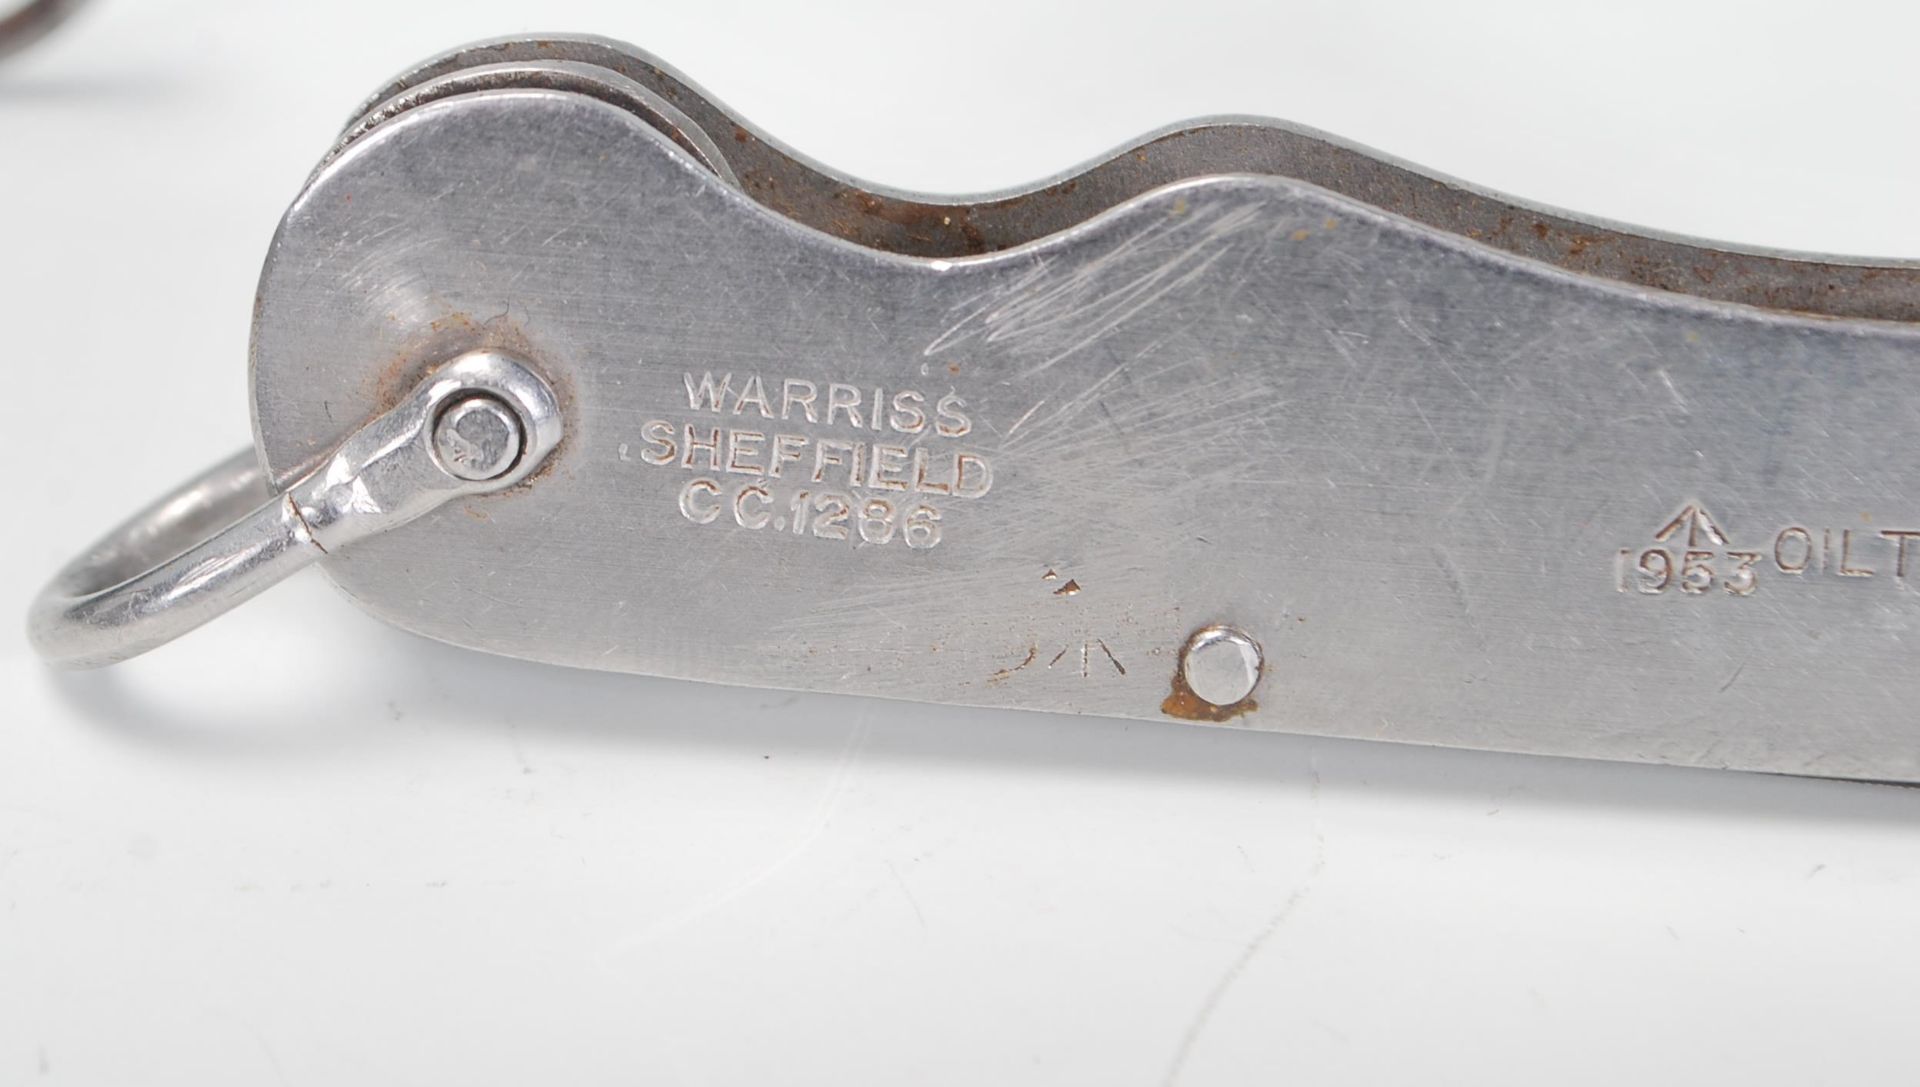 A military issue Warriss of Sheffield pocket knife marked 1953 with broad arrow and Oil the - Image 8 of 9